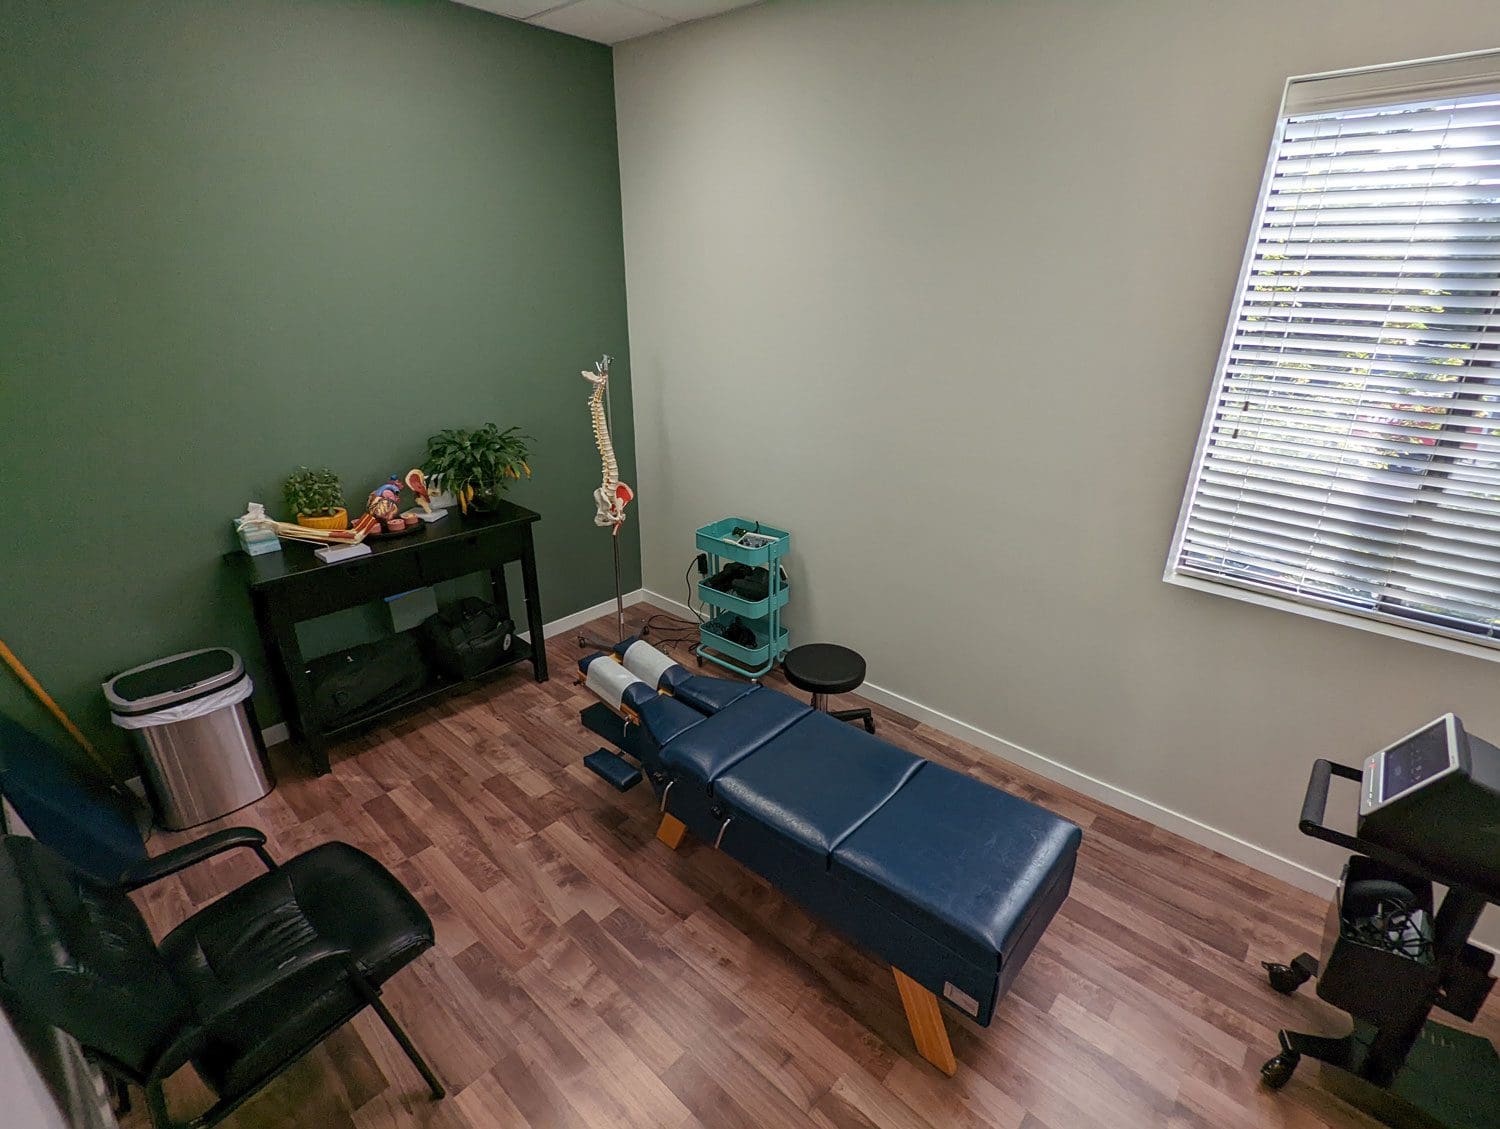 Tigard Chiropractic treatment room with adjustment table.